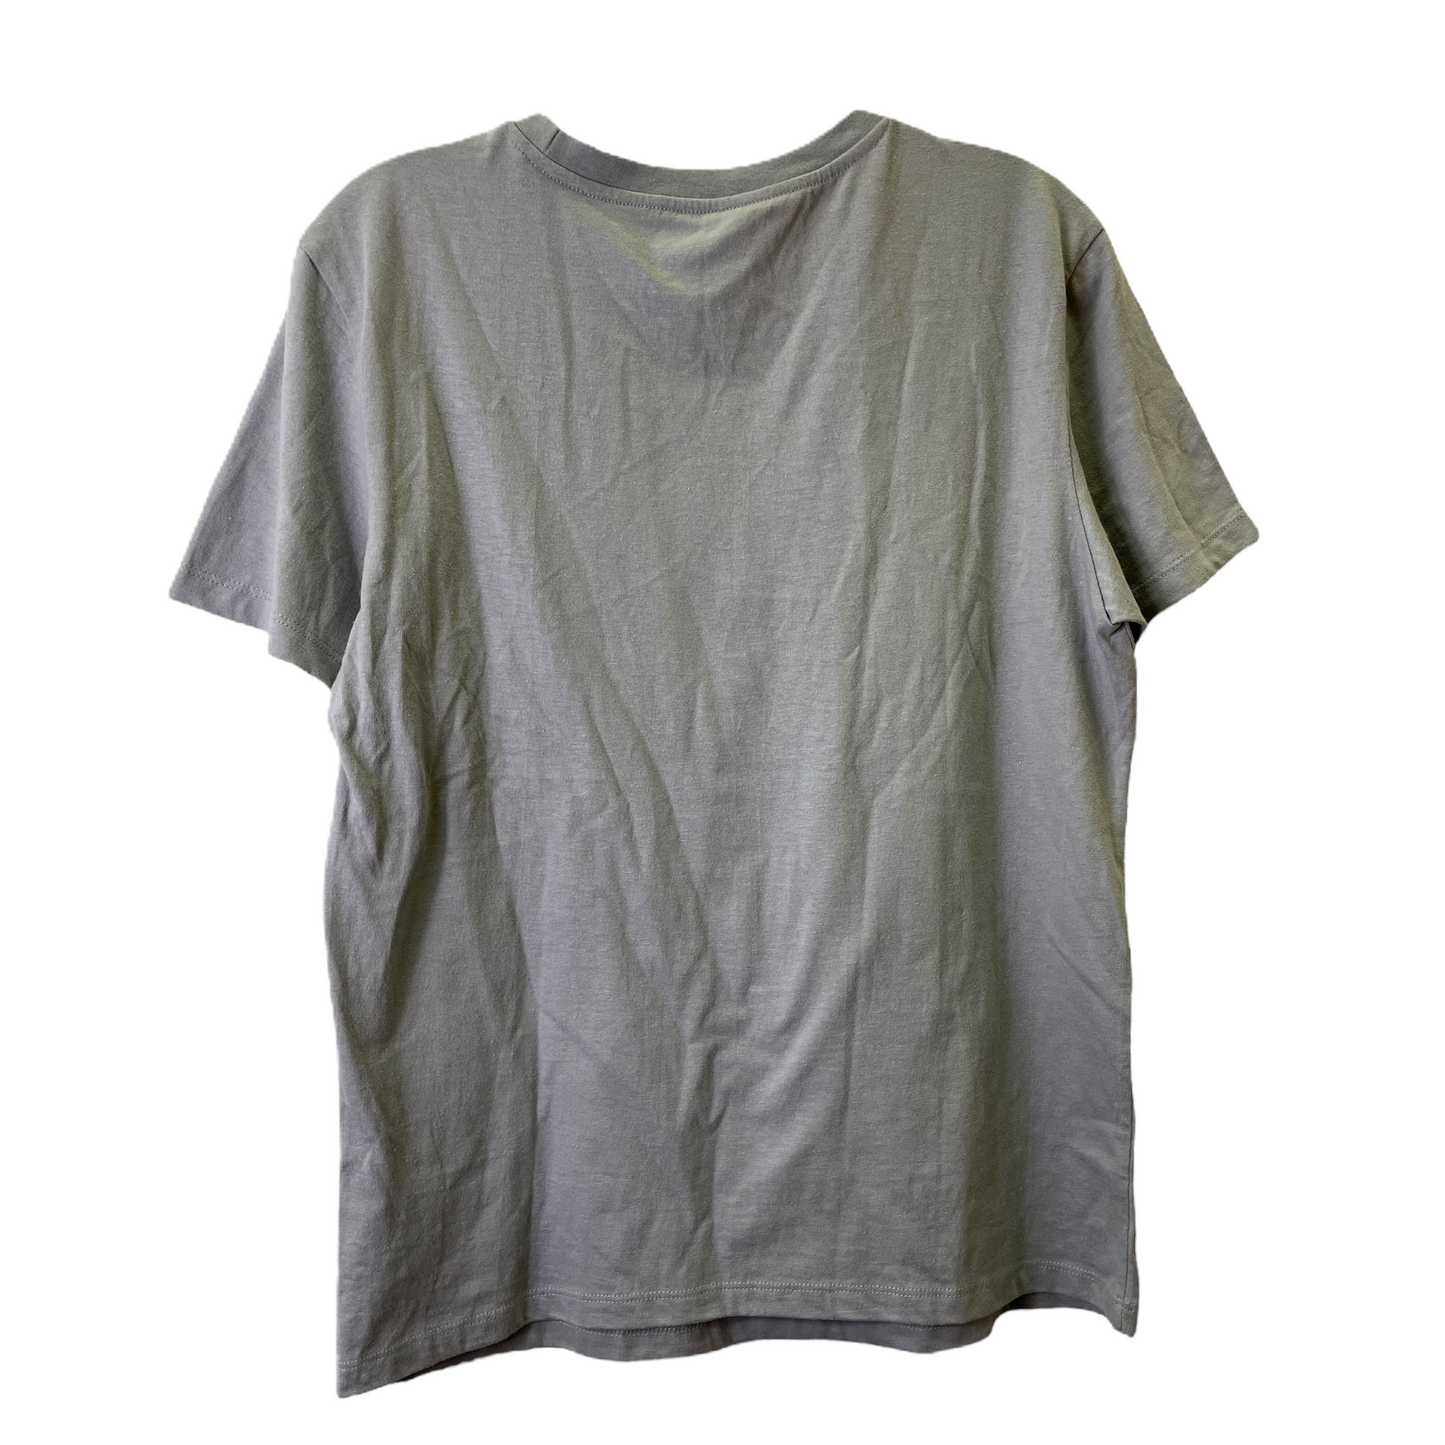 Grey Athletic Top Short Sleeve By Adidas, Size: M